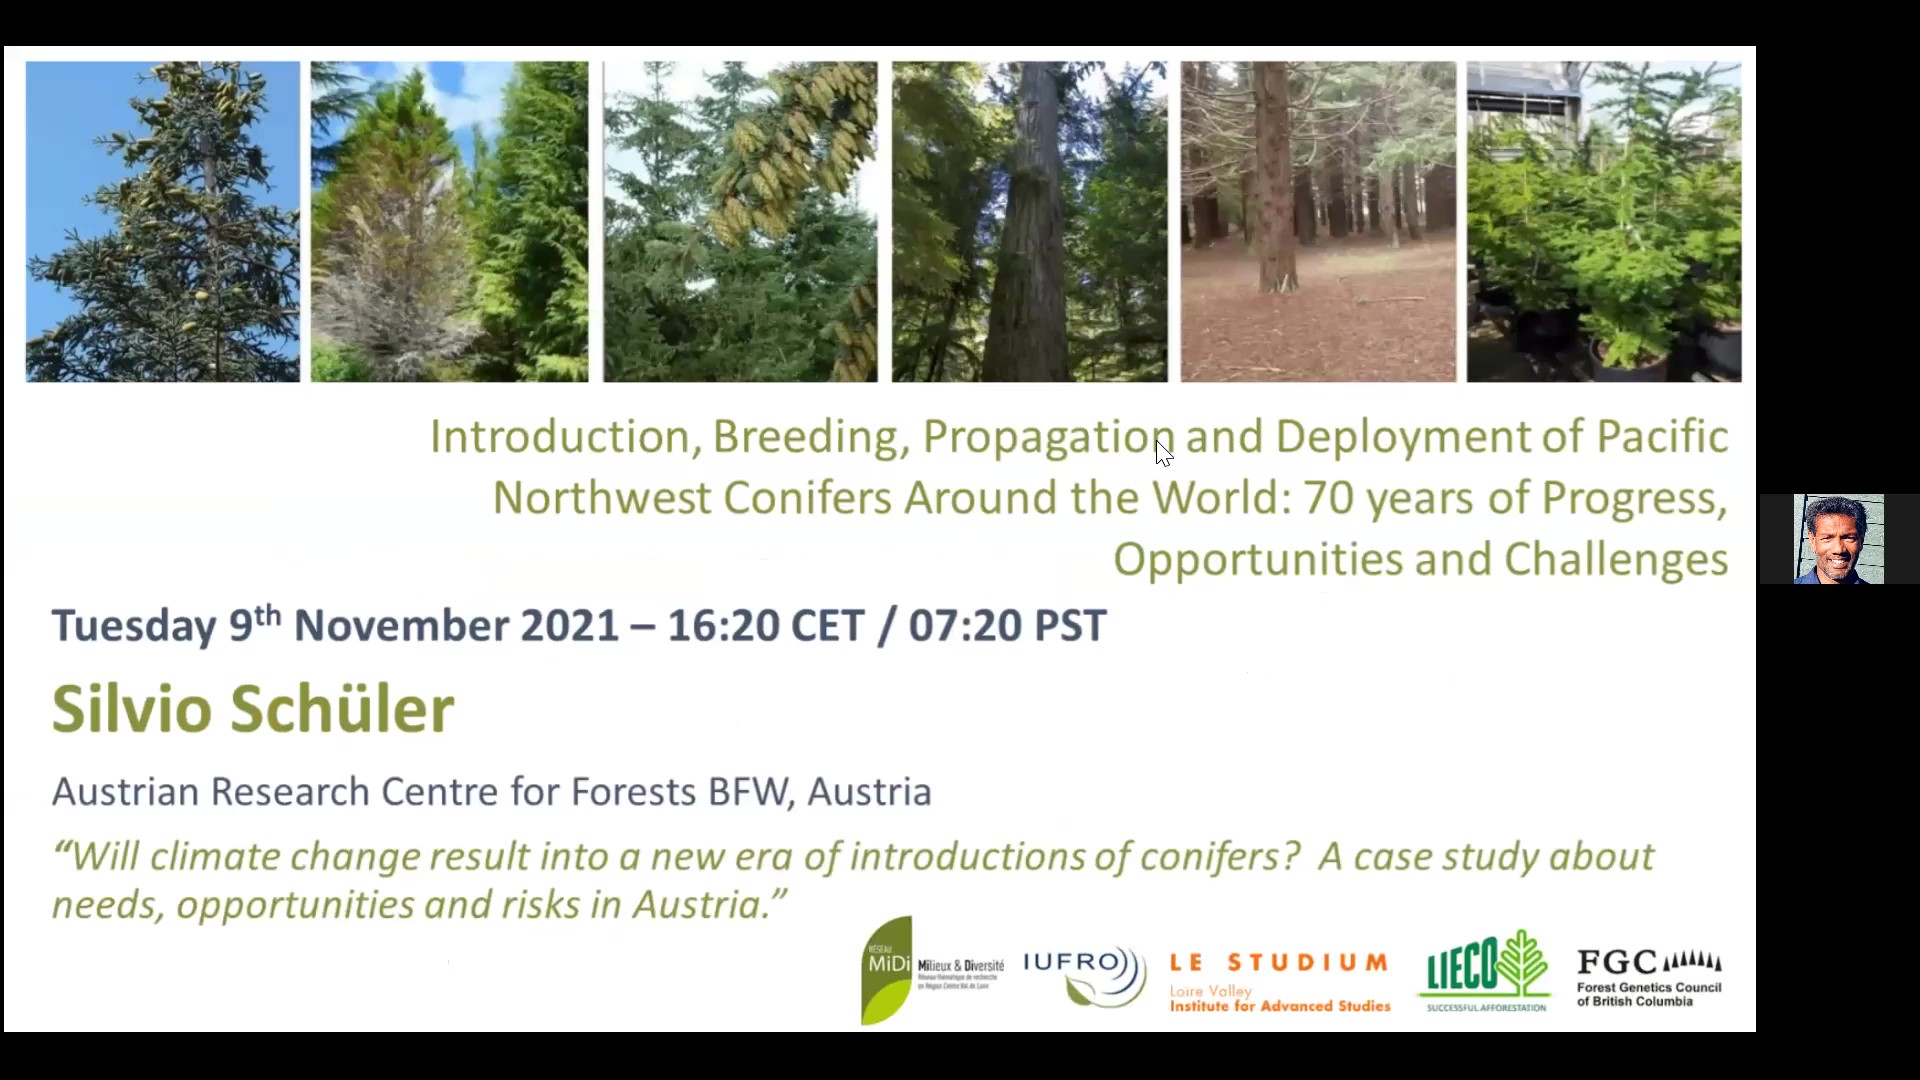 Will climate change result into a new era of introductions of conifers? A case study about 
needs, opportunities and risks in Austria - Silvio- Schüler